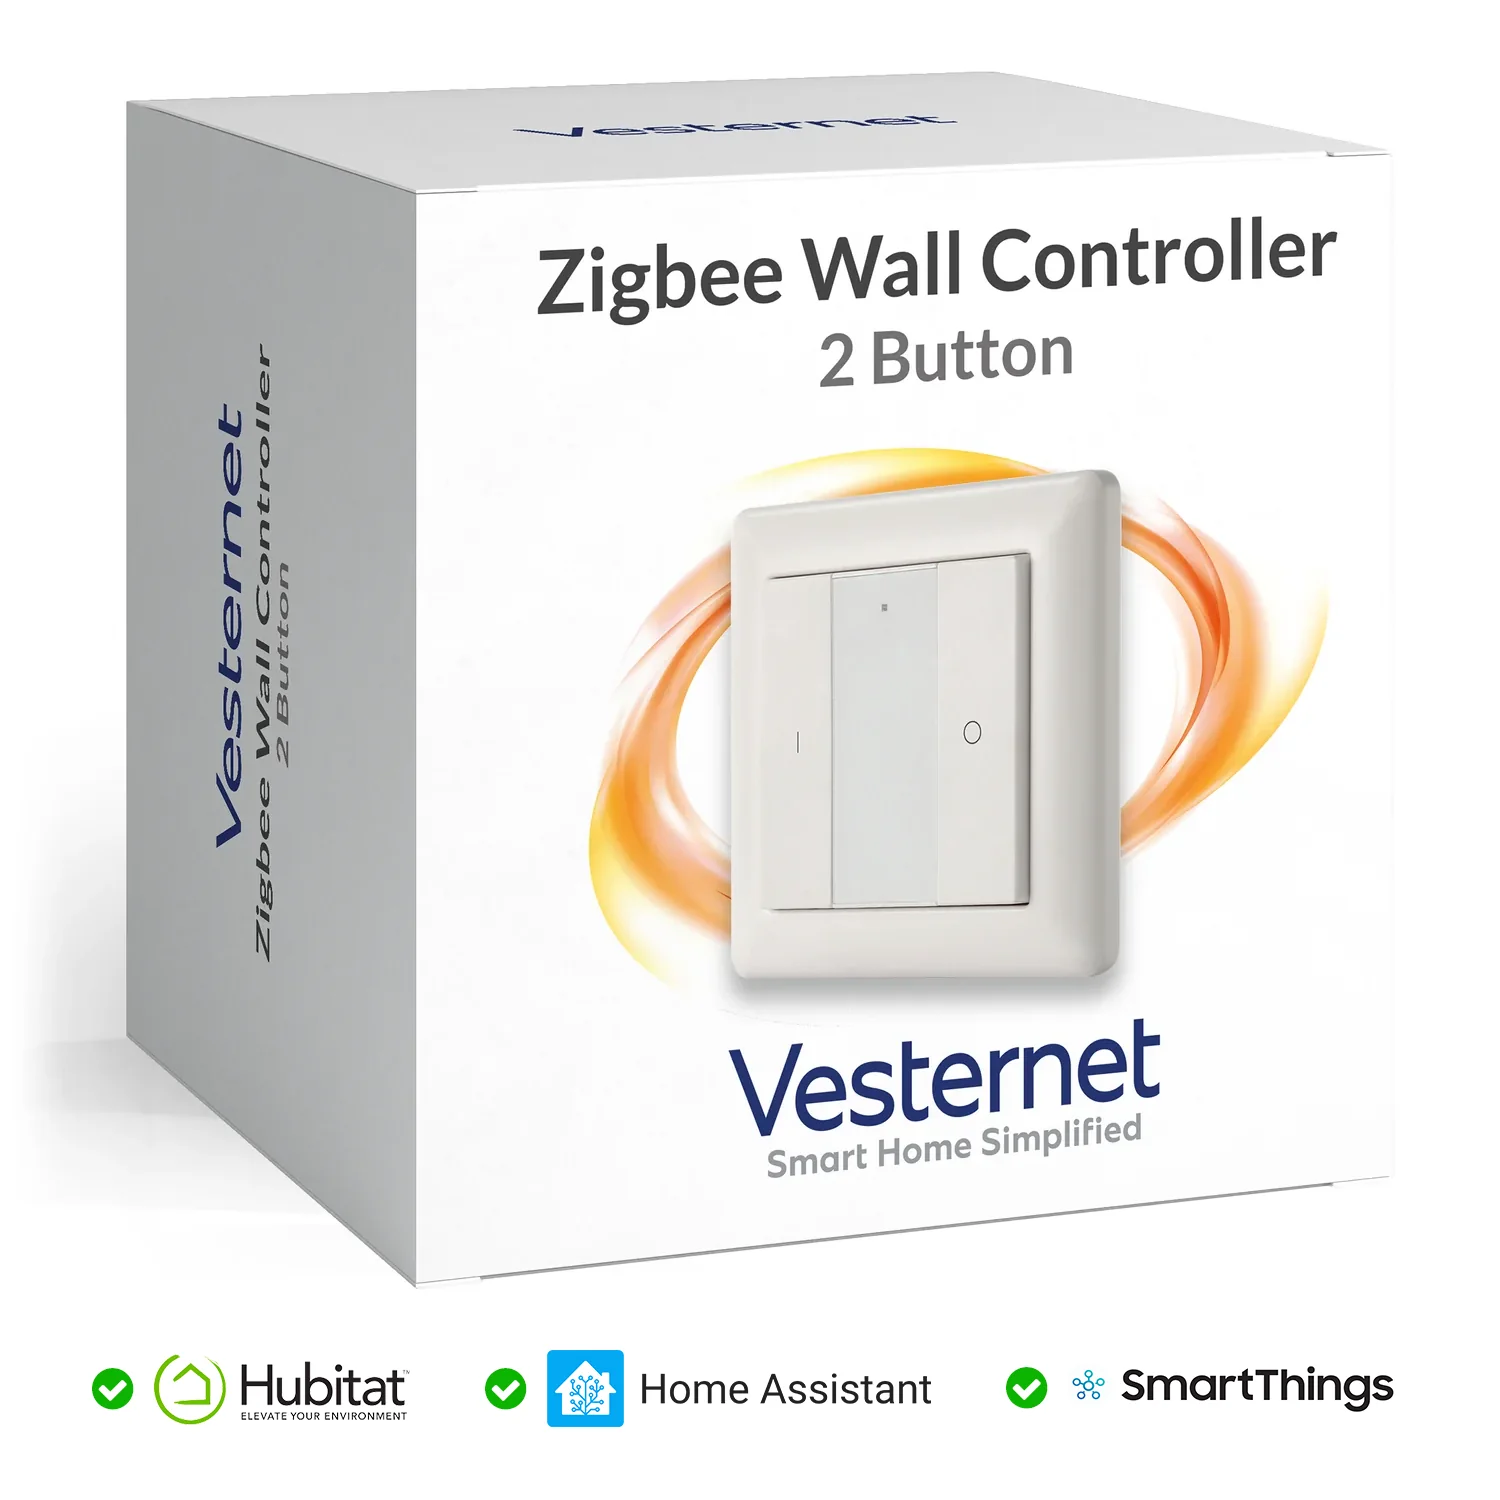 Vesternet Zigbee Wall Controller - 2 Button Questions & Answers